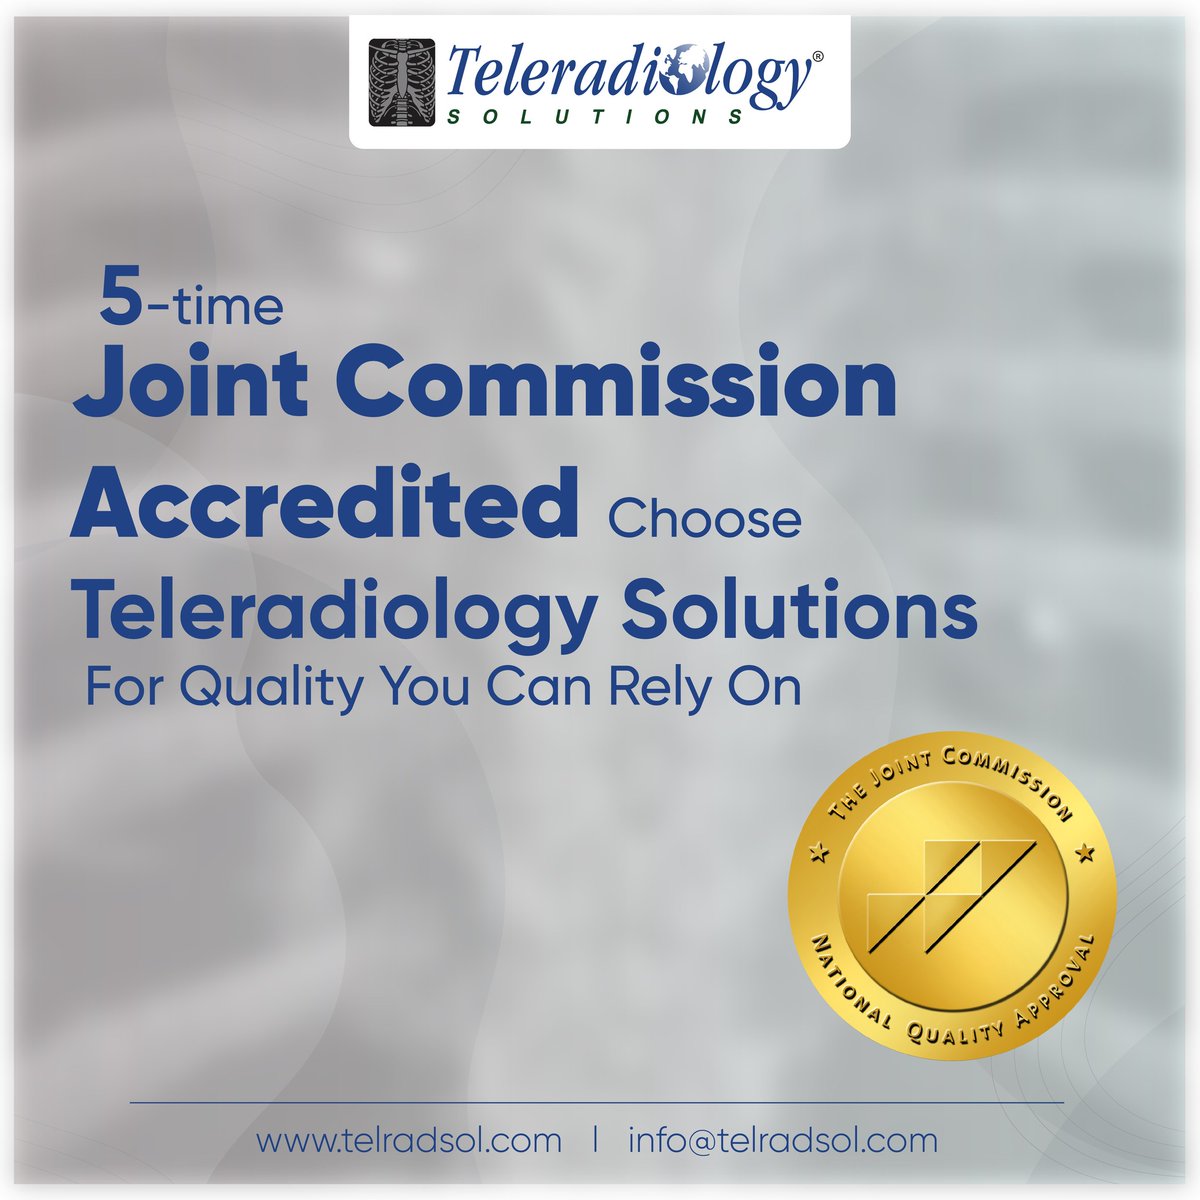 Experience quality assurance with Teleradiology Solutions – a Five-time Joint Commission accredited teleradiology service provider. Elevate your healthcare standards with our proven excellence.

Learn more about our services: telradsol.com/subspecialty-t…